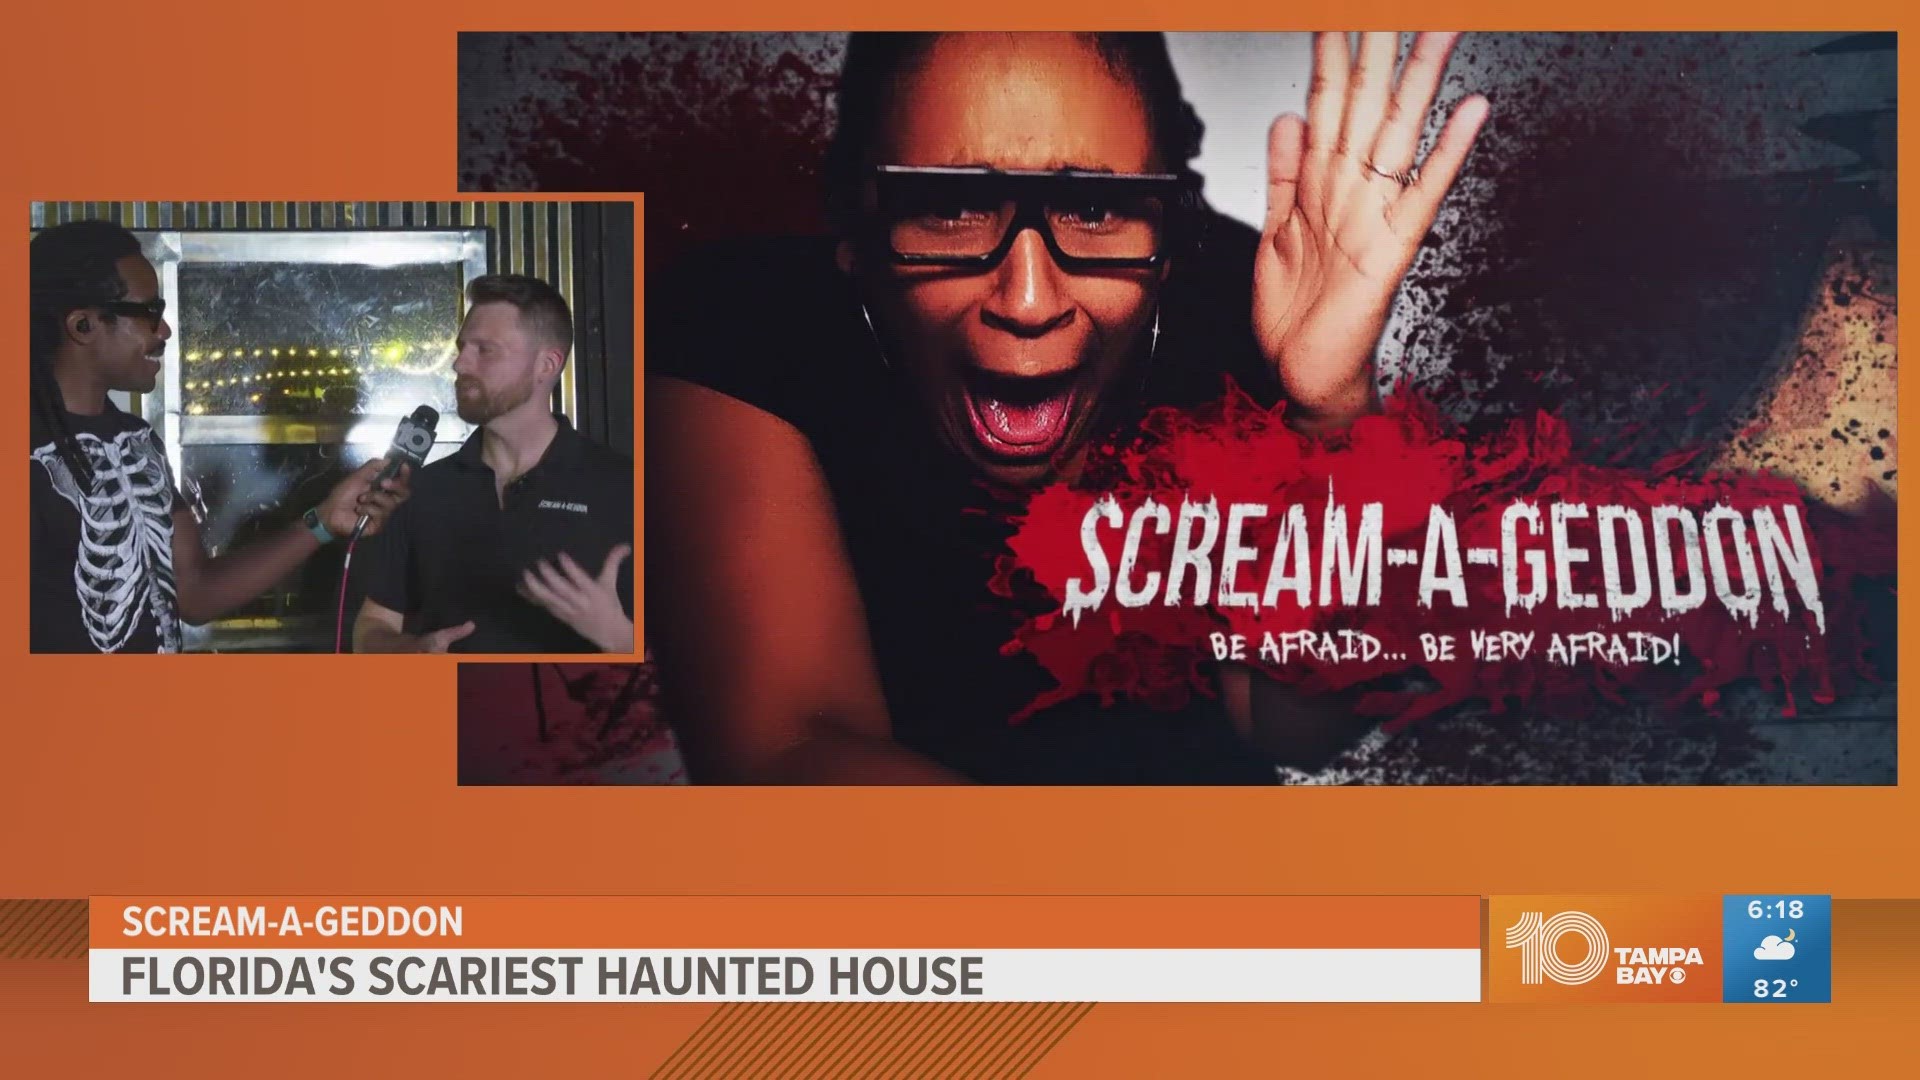 Florida's "Scariest Haunted House" features a science experiment gone horribly wrong. Busch Gardens has more friendly-family offerings.